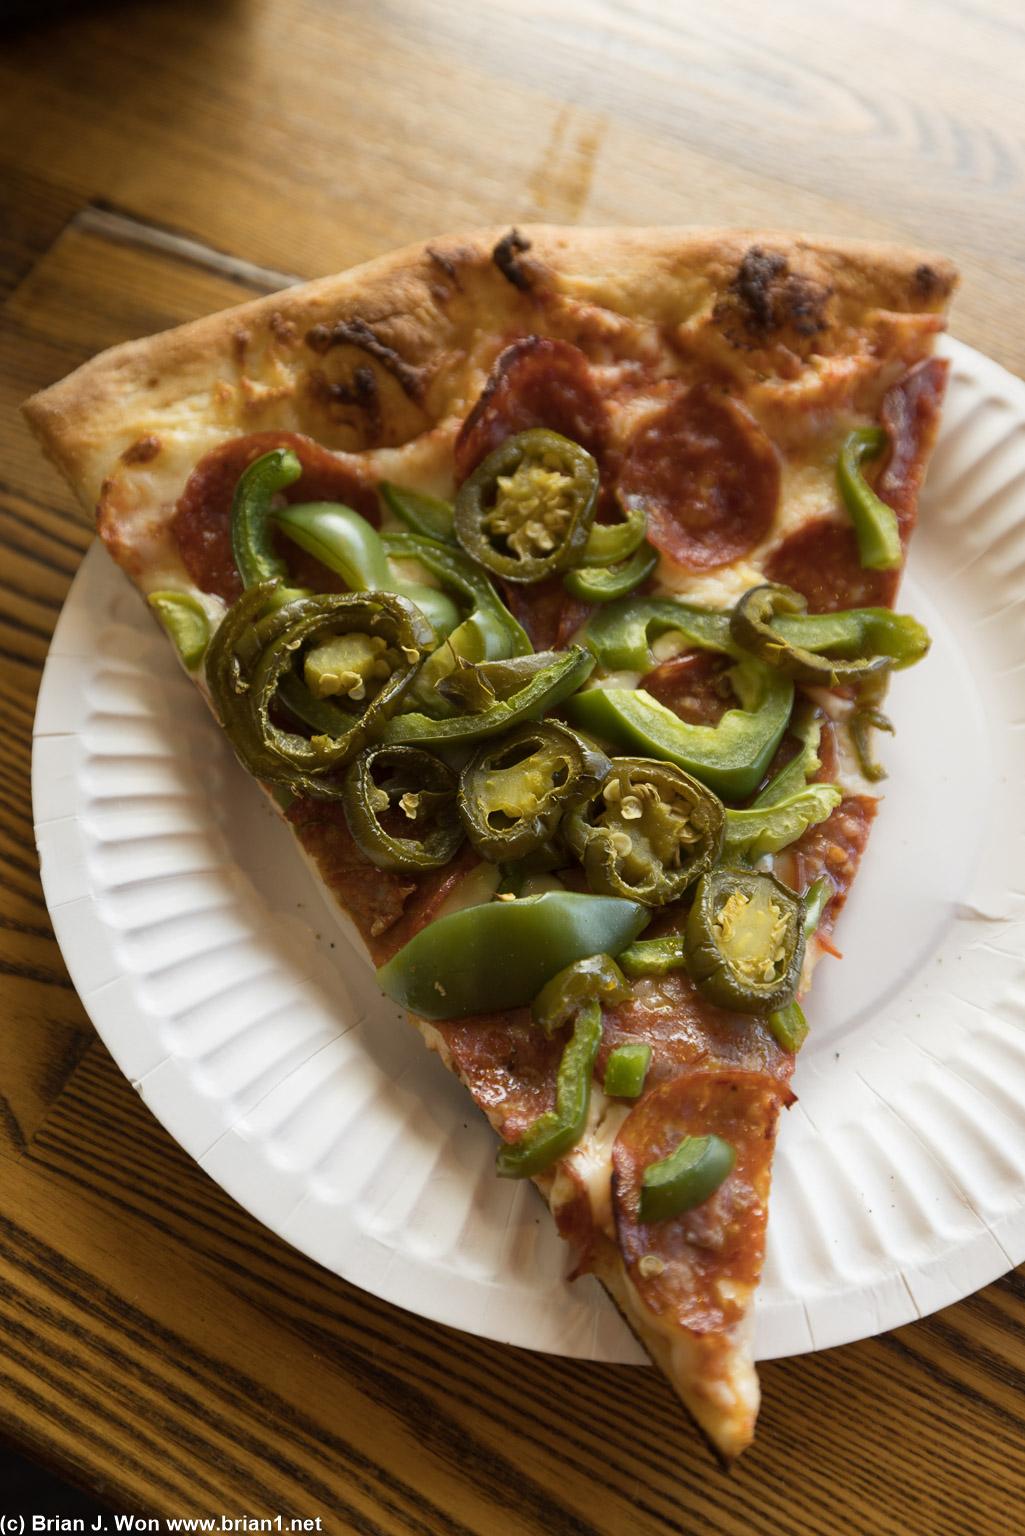 Pepperoni and jalapeno hit the spot.